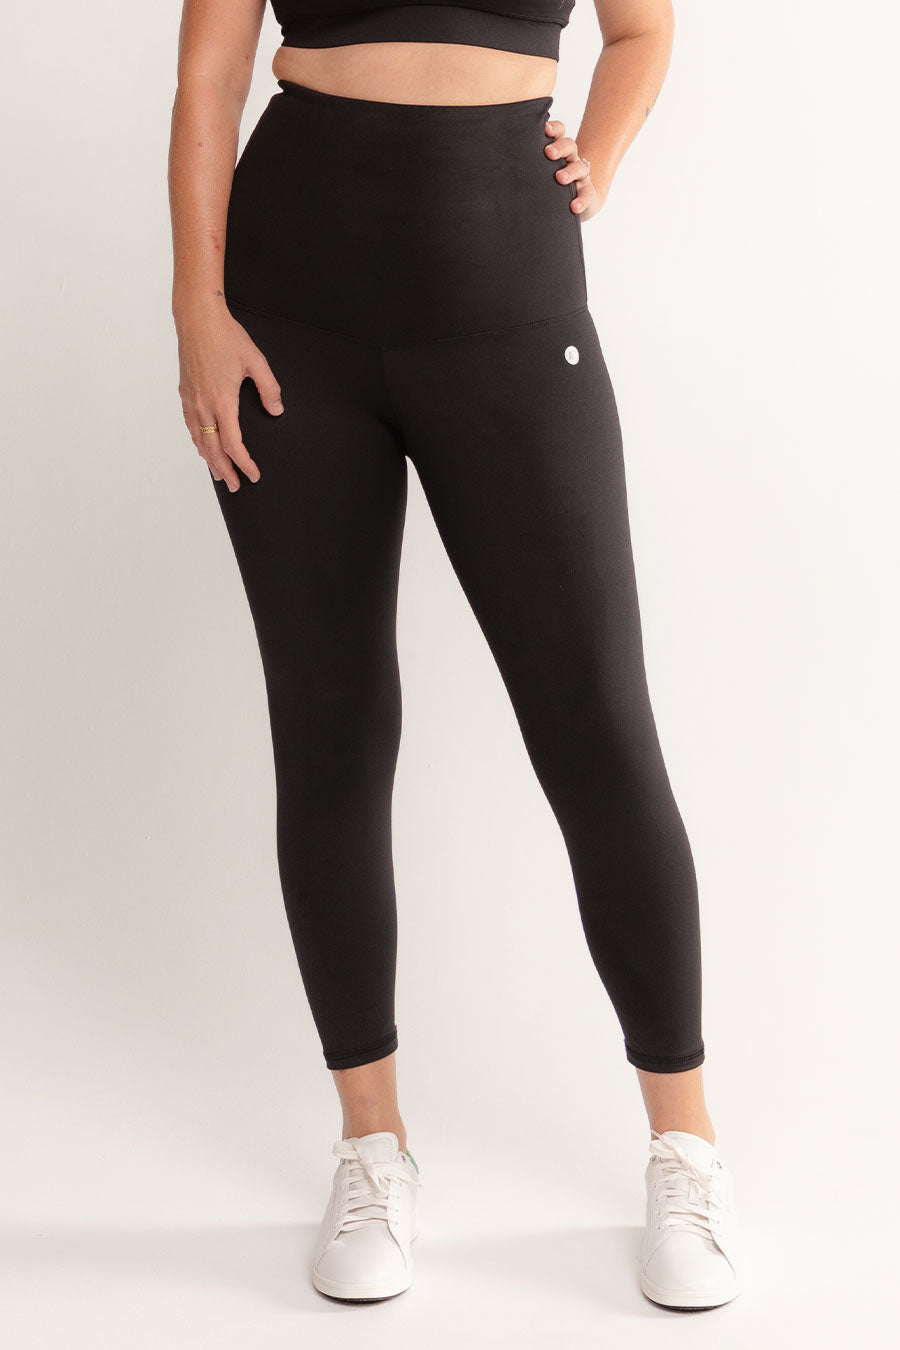 Recovery Support 7/8 Length Tight - Black from Active Truth™
